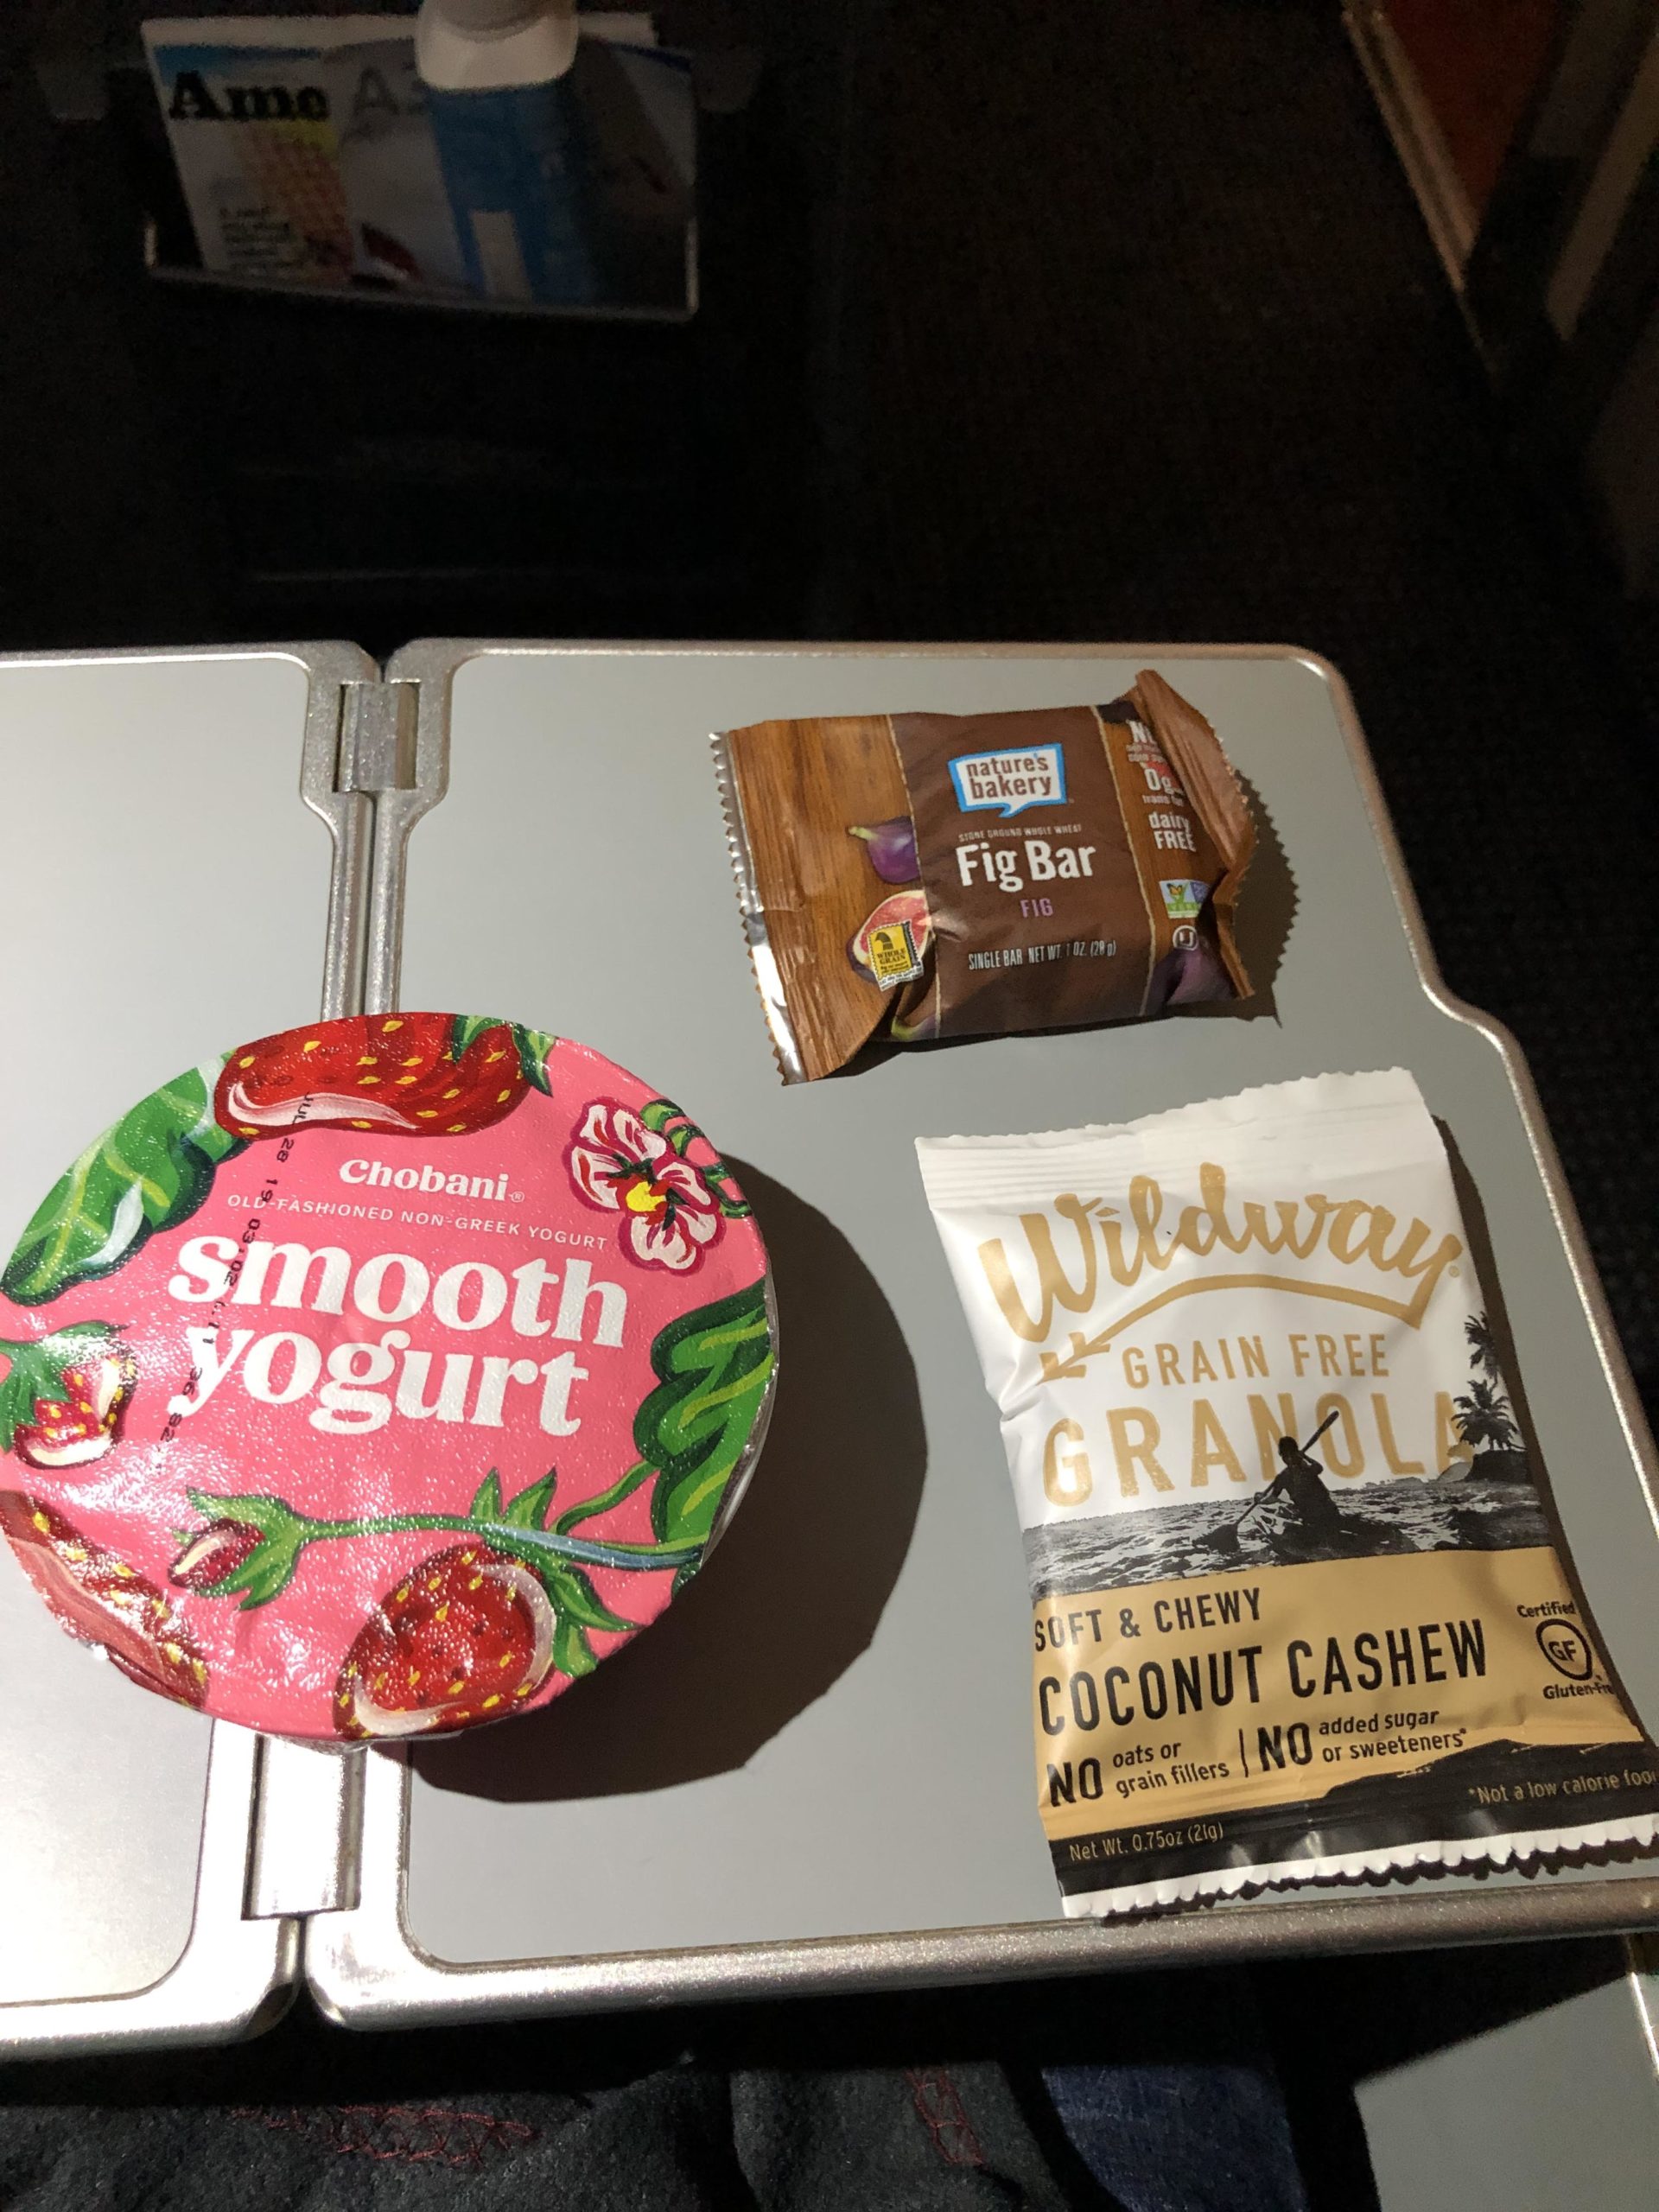 American Airlines Economy Class Breakfast